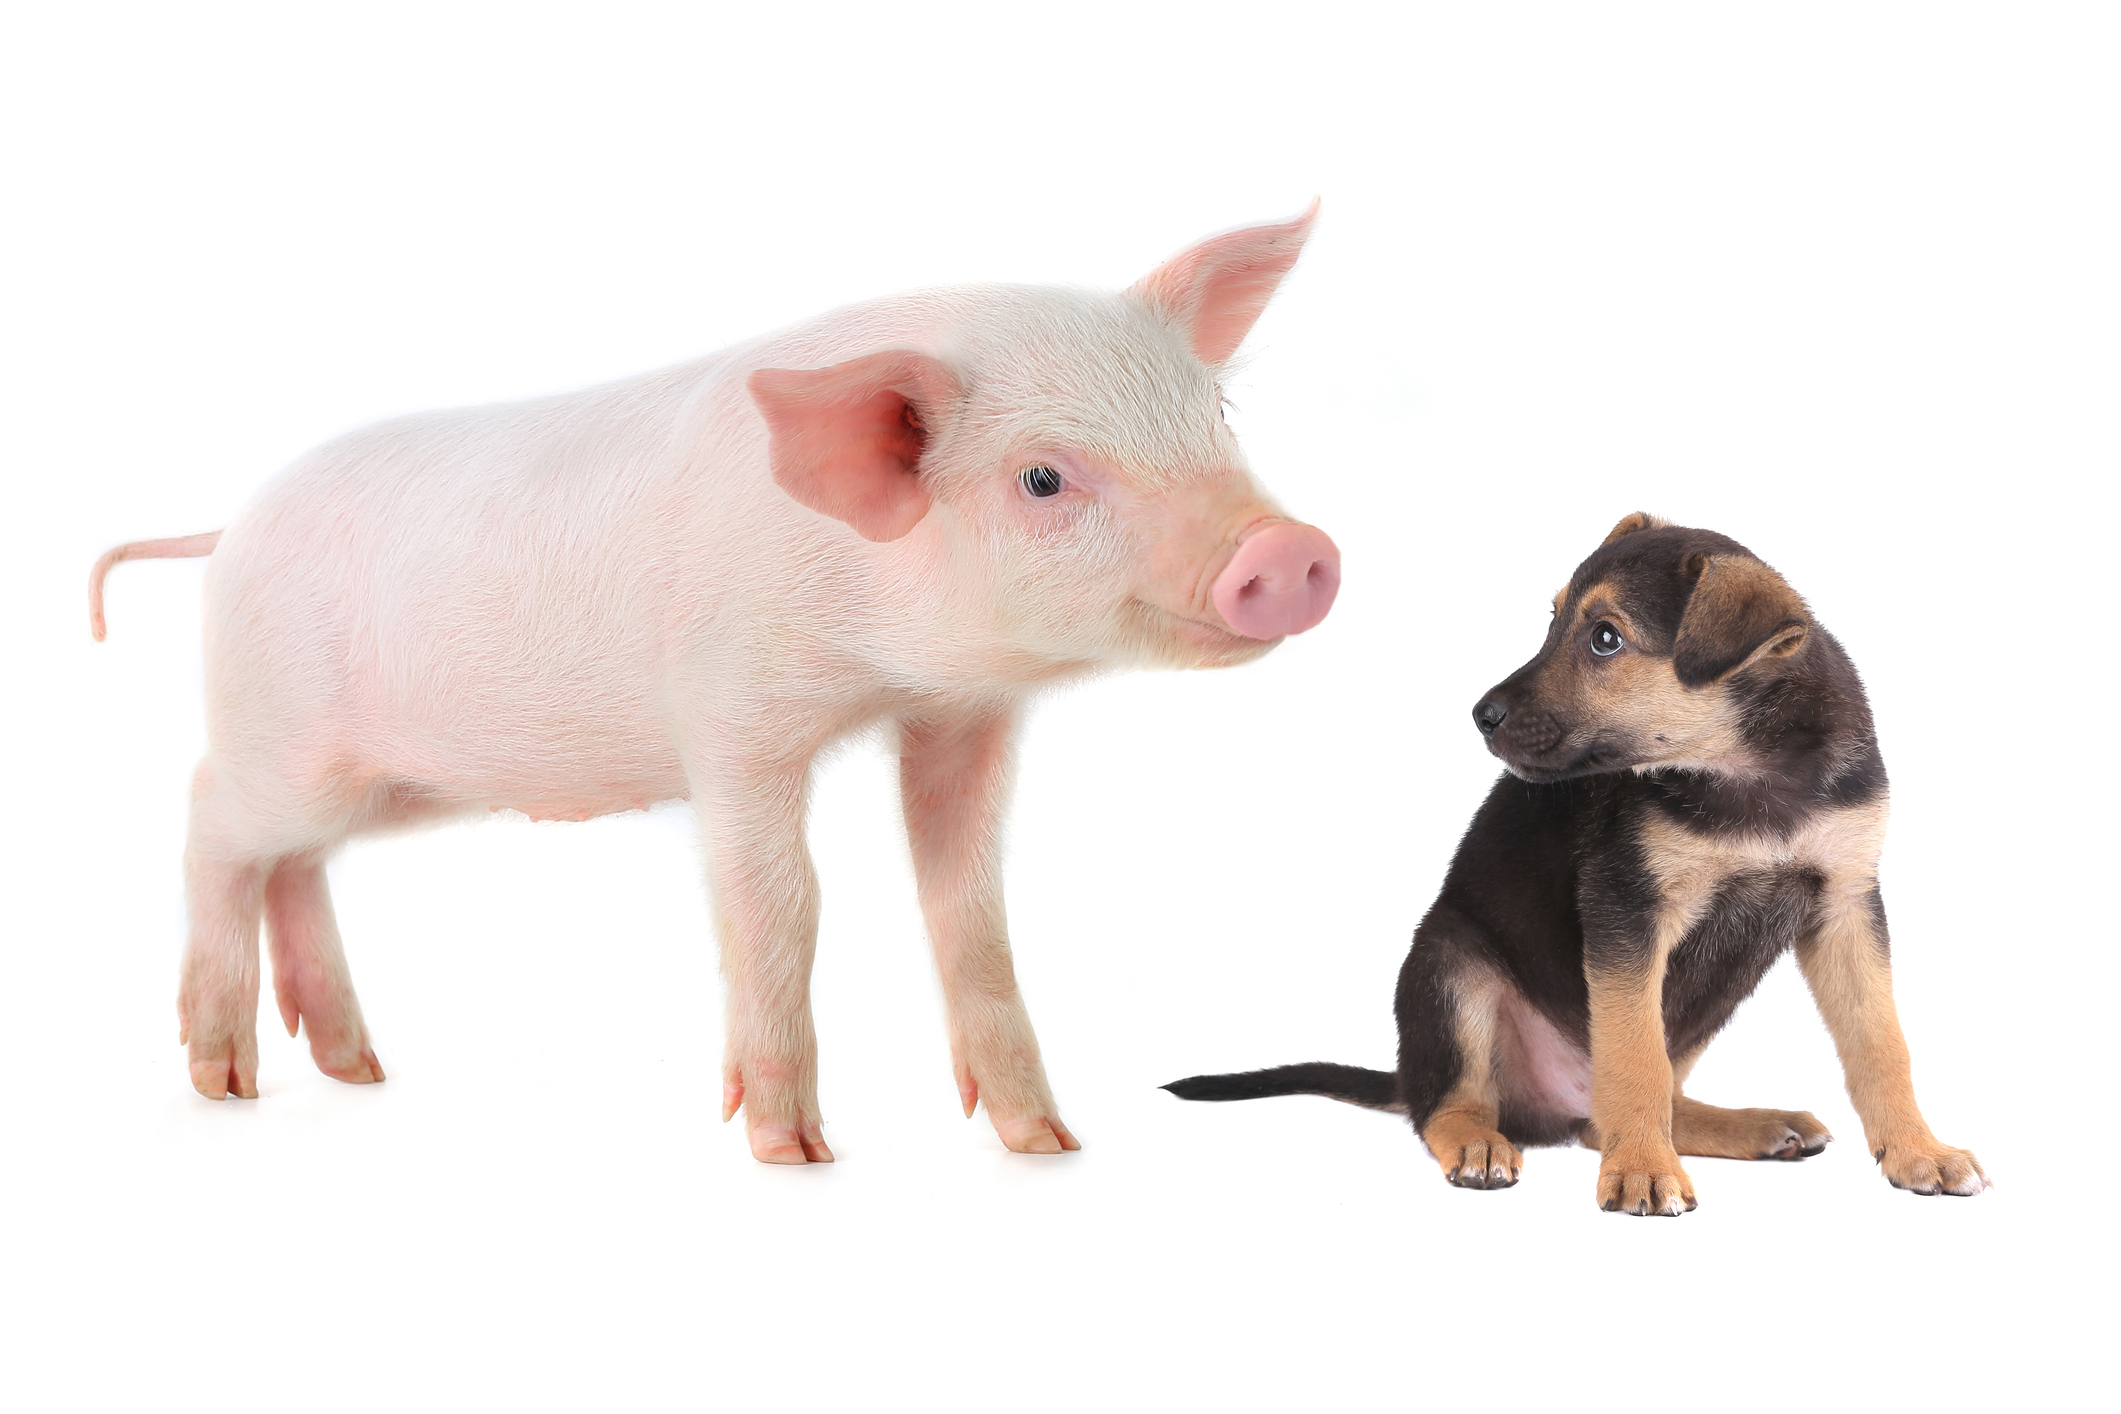 Dog and pig